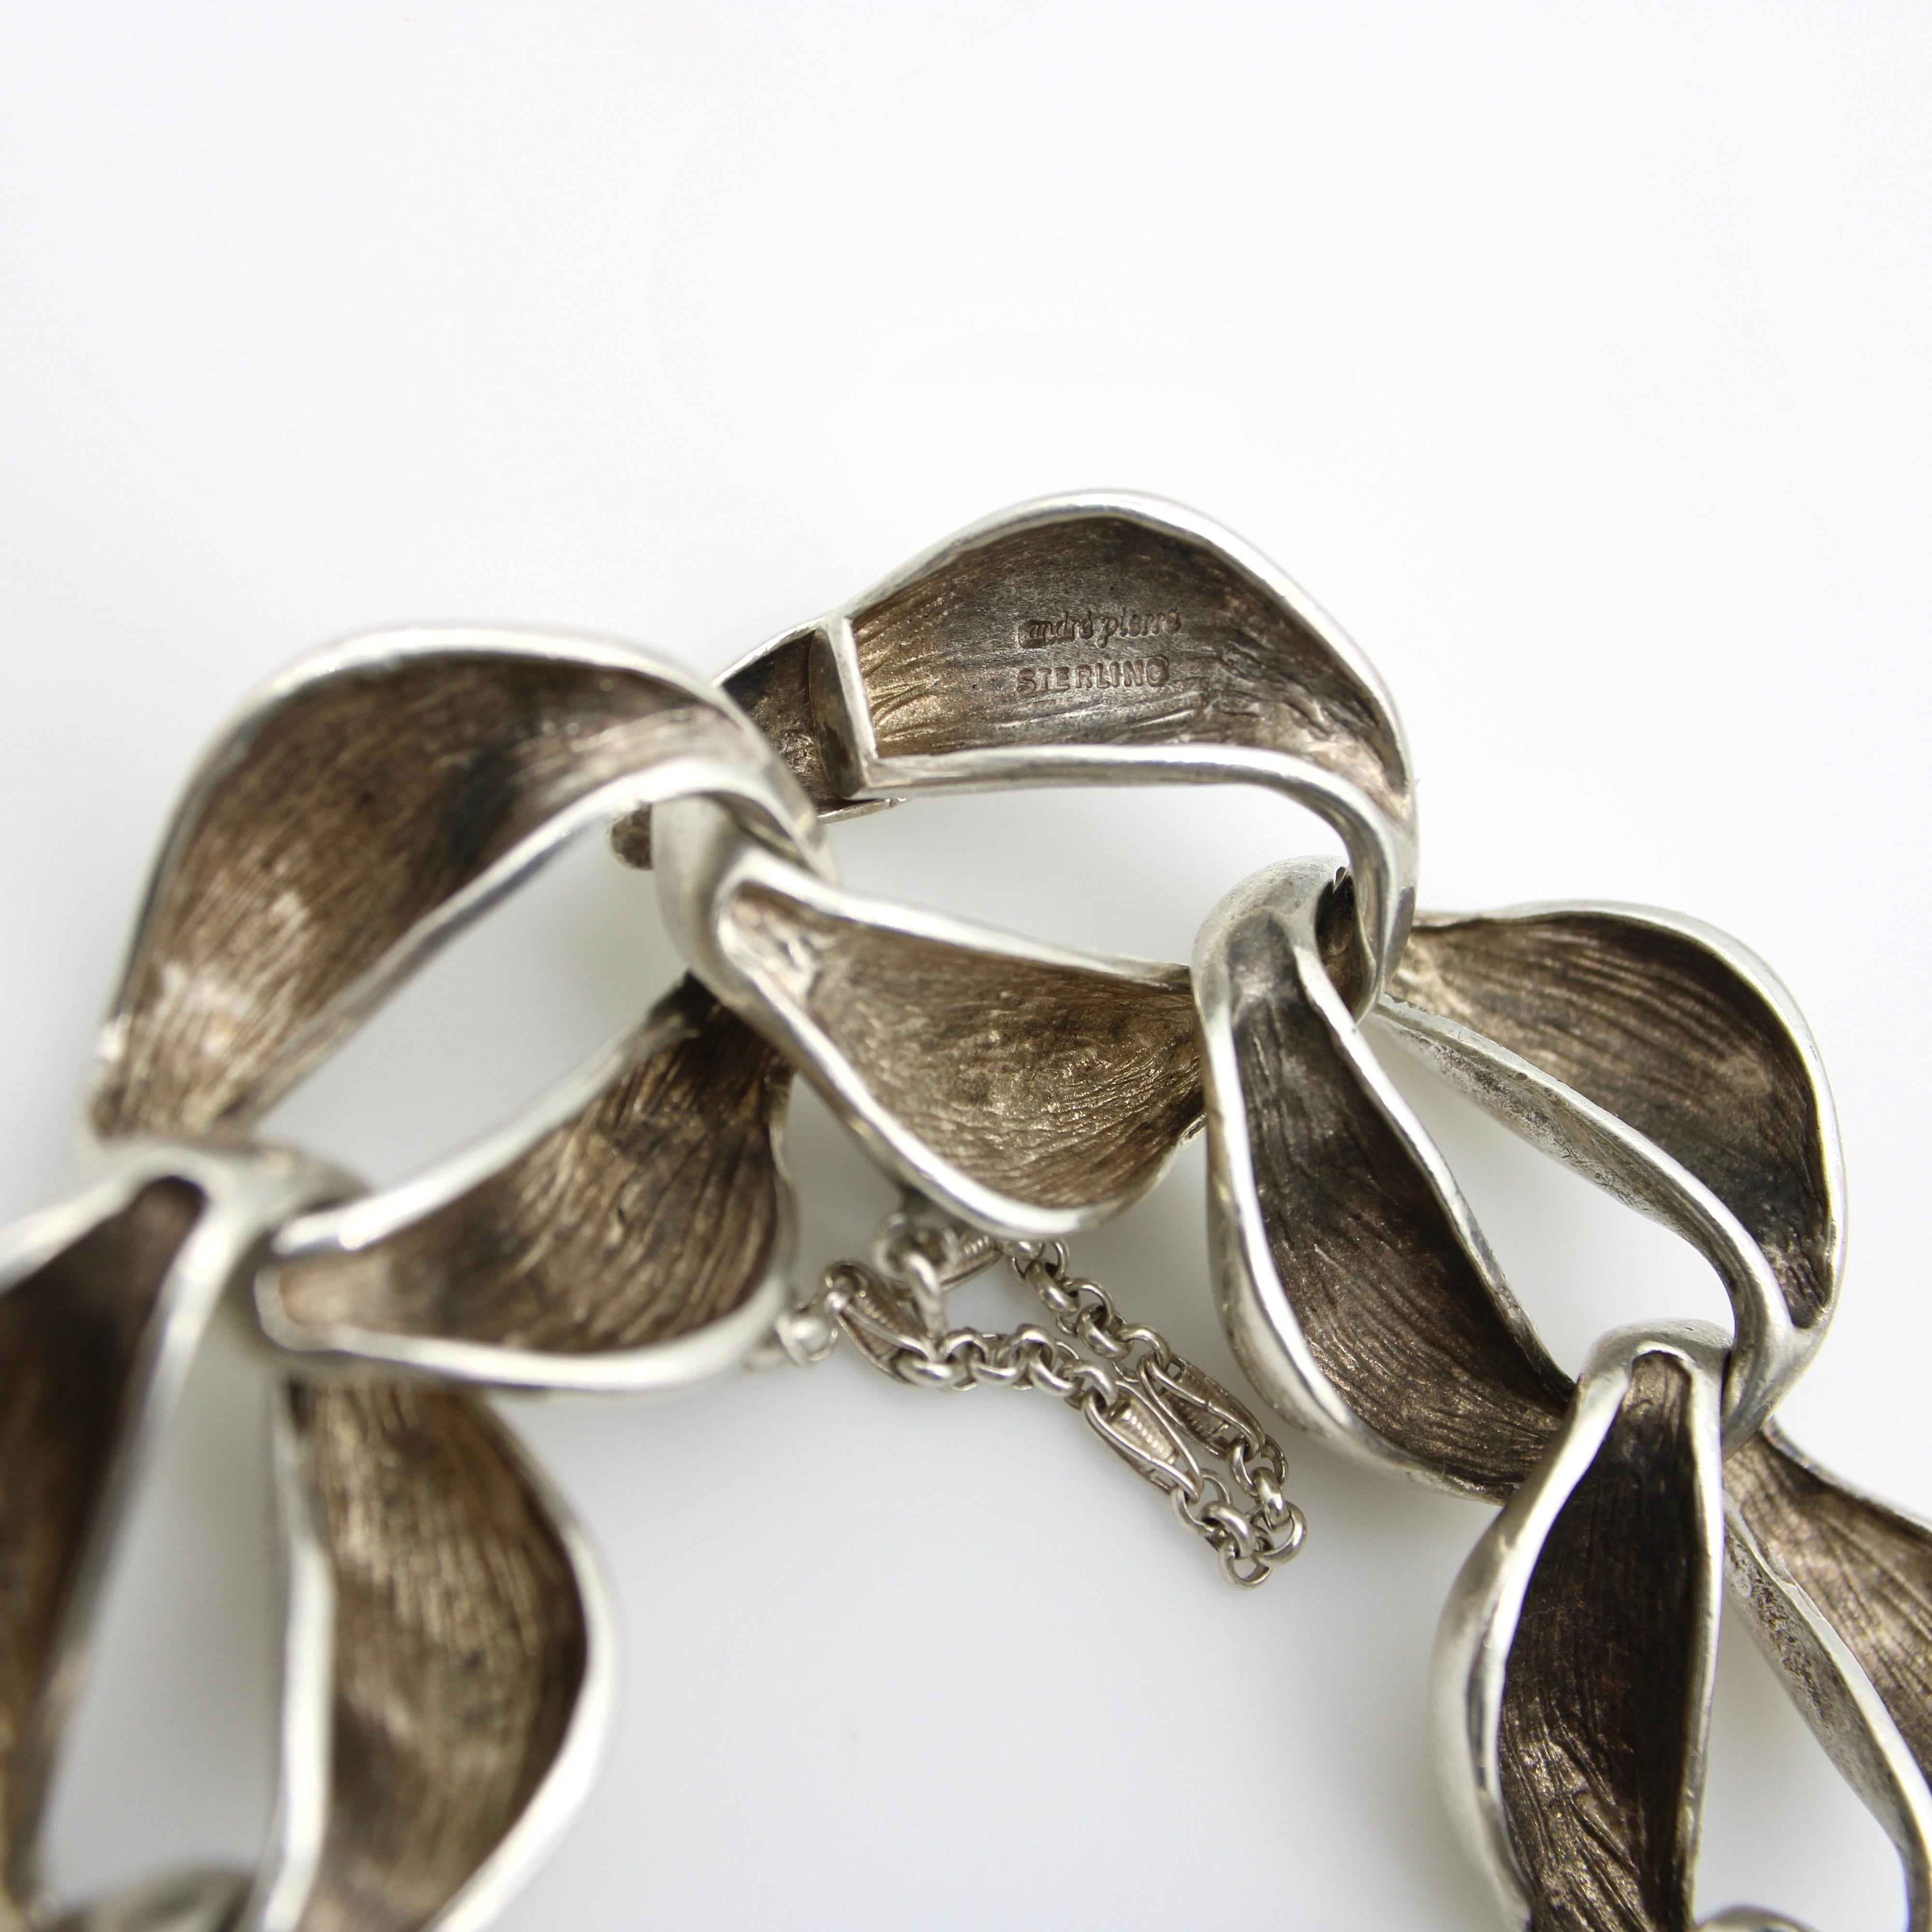 This fabulous sterling silver bracelet consists of a giant curb link variation with a bold, chunky look. Each link has an organic form that undulates in and out of thickness creating a beautiful statement piece. The links are thick, but are hollow